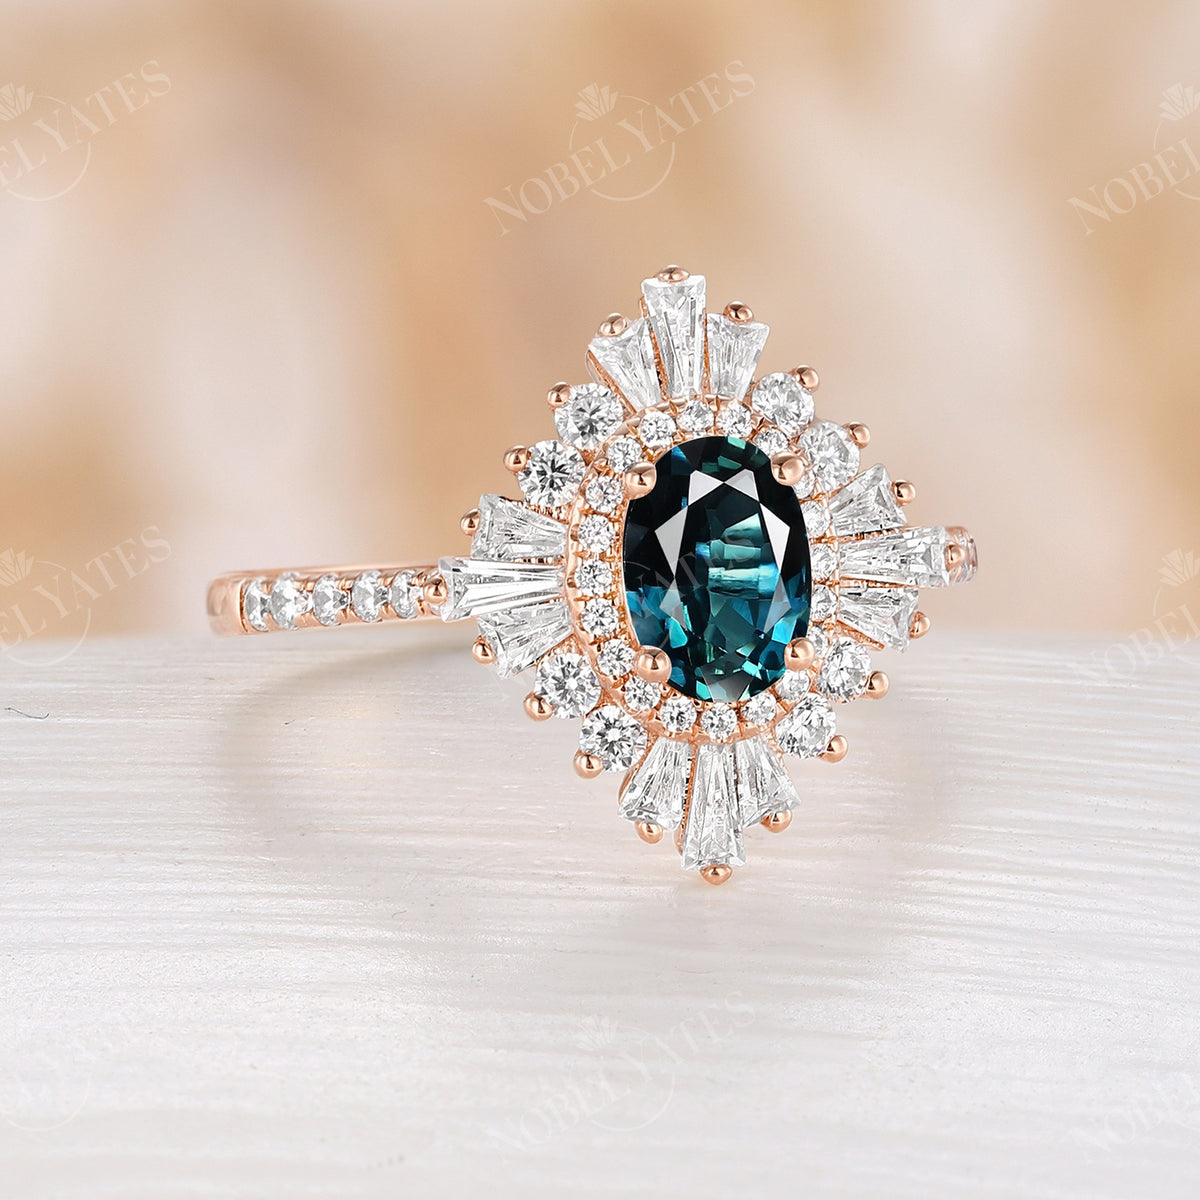 Oval Teal Sapphire Uniuqe Art Deco Baguette Halo Engagement Ring Pave Band